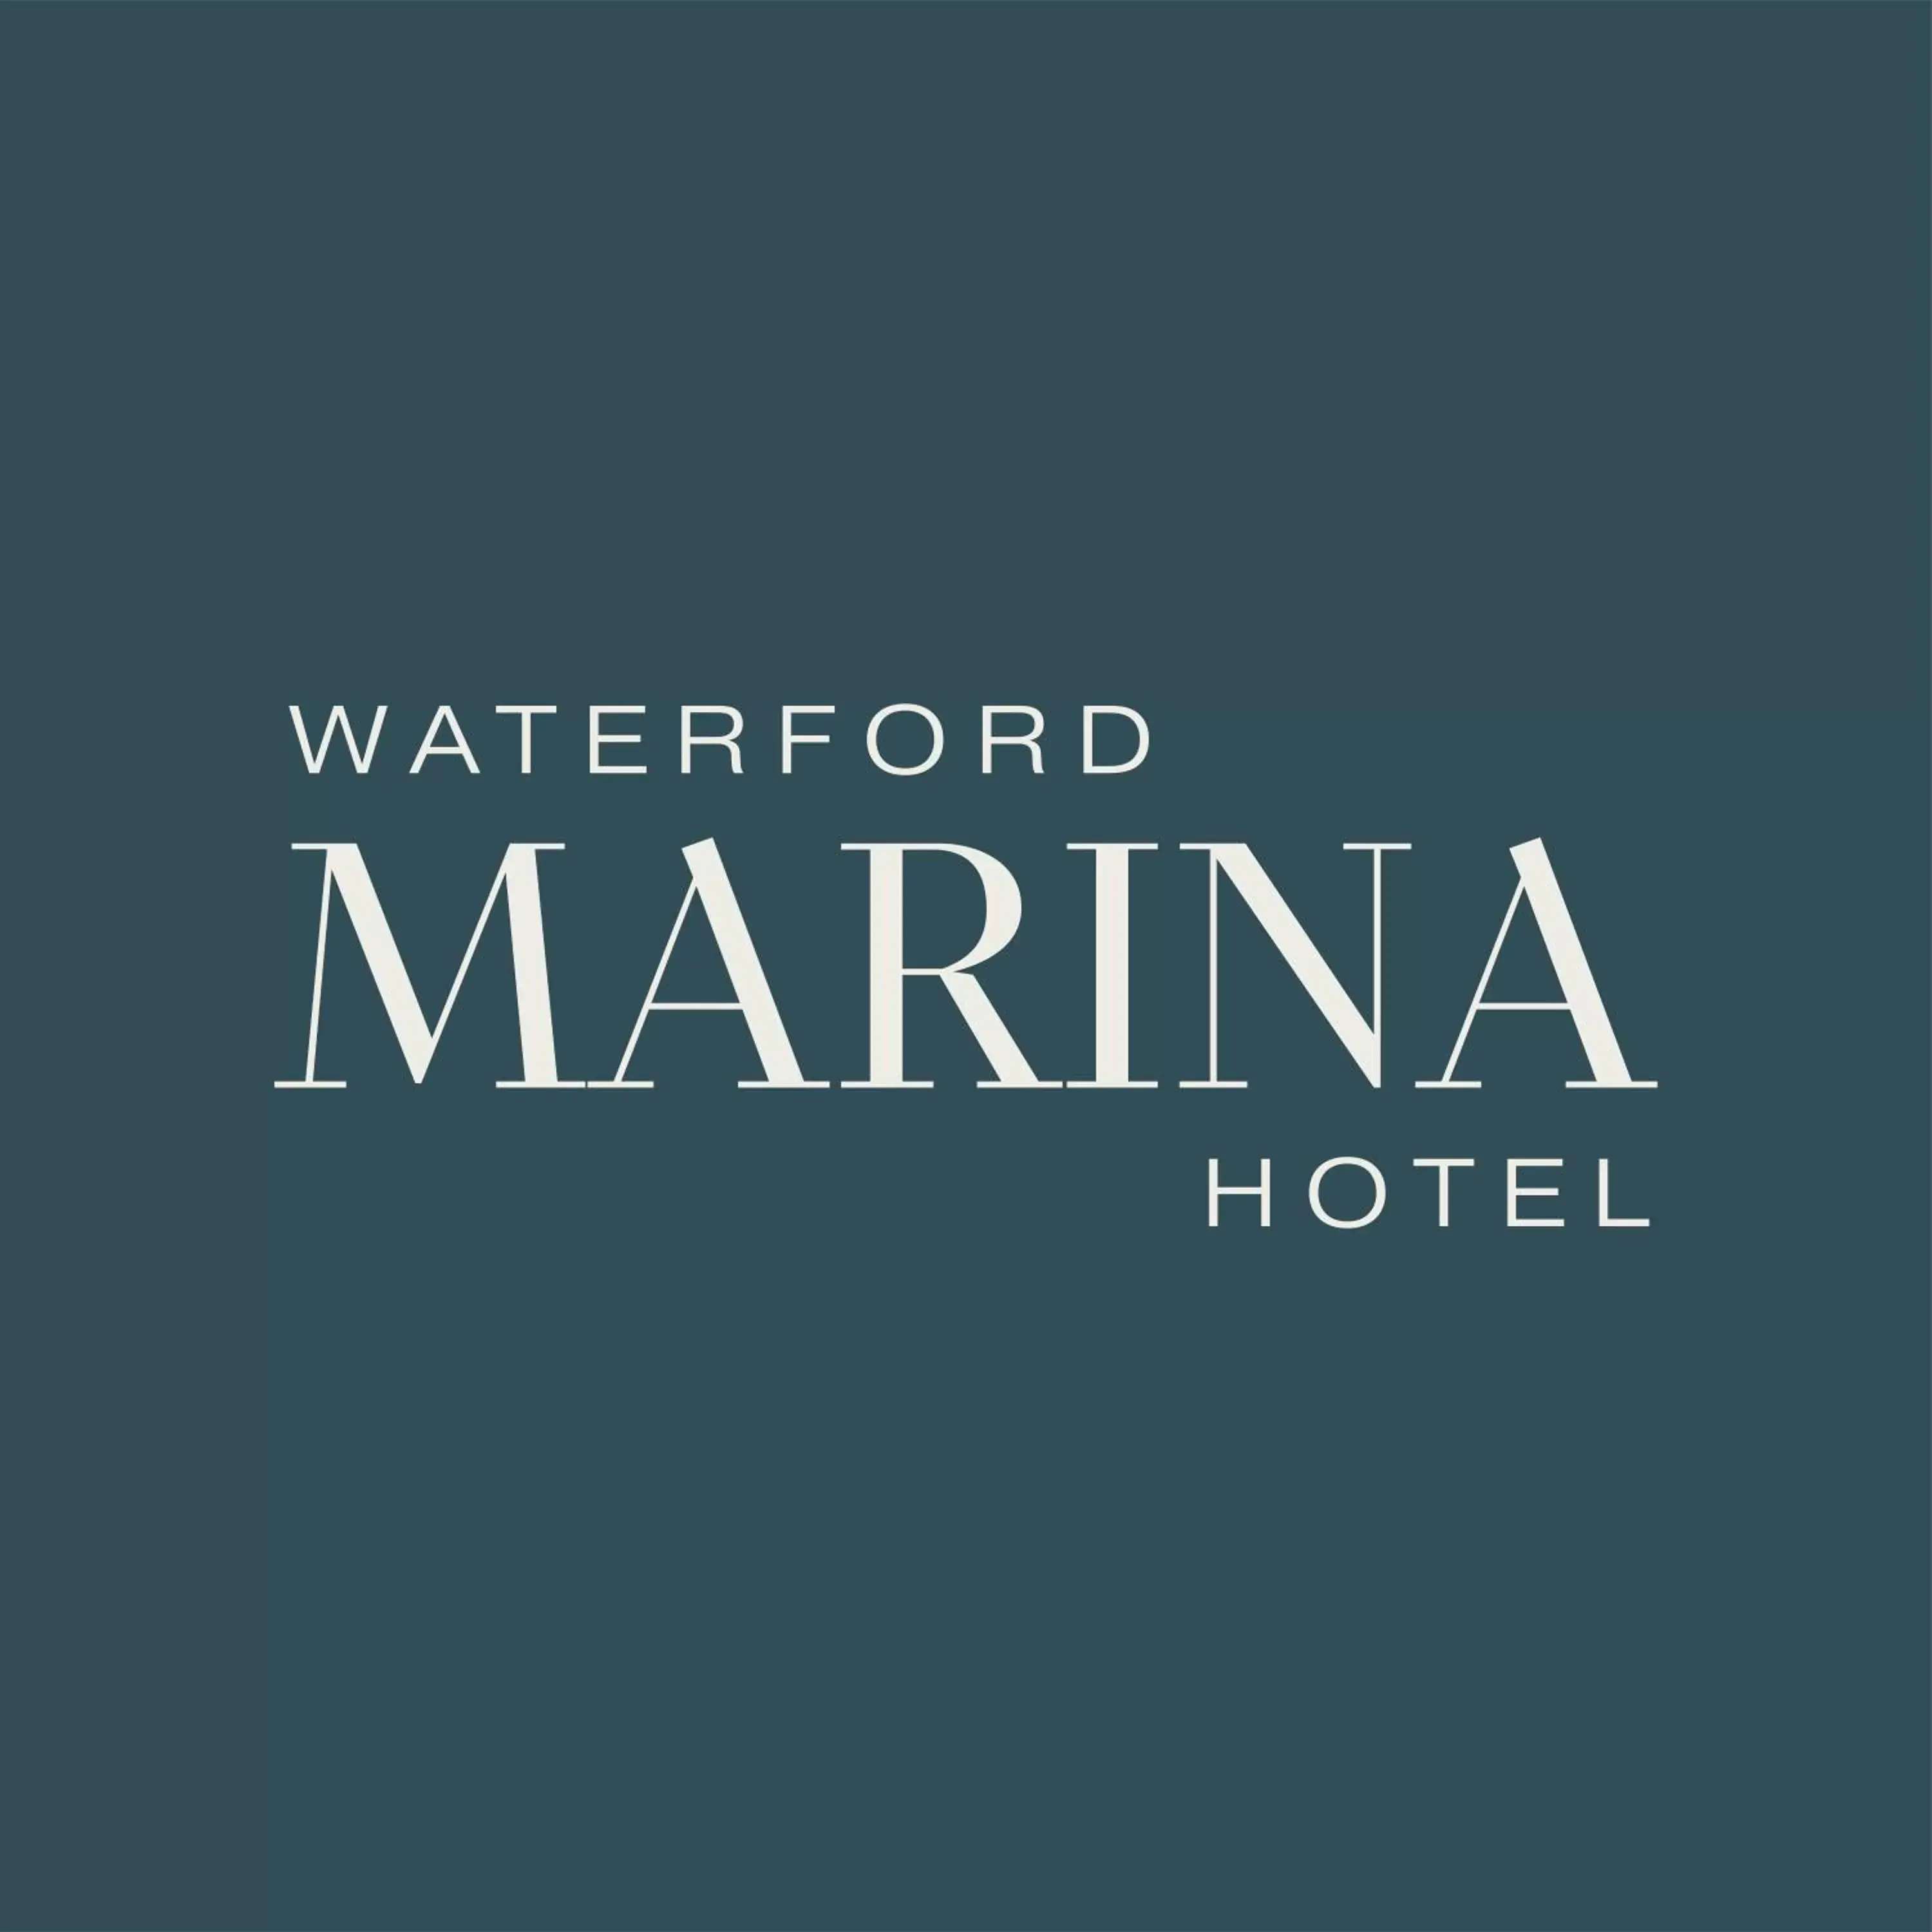 Property logo or sign, Property Logo/Sign in Waterford Marina Hotel